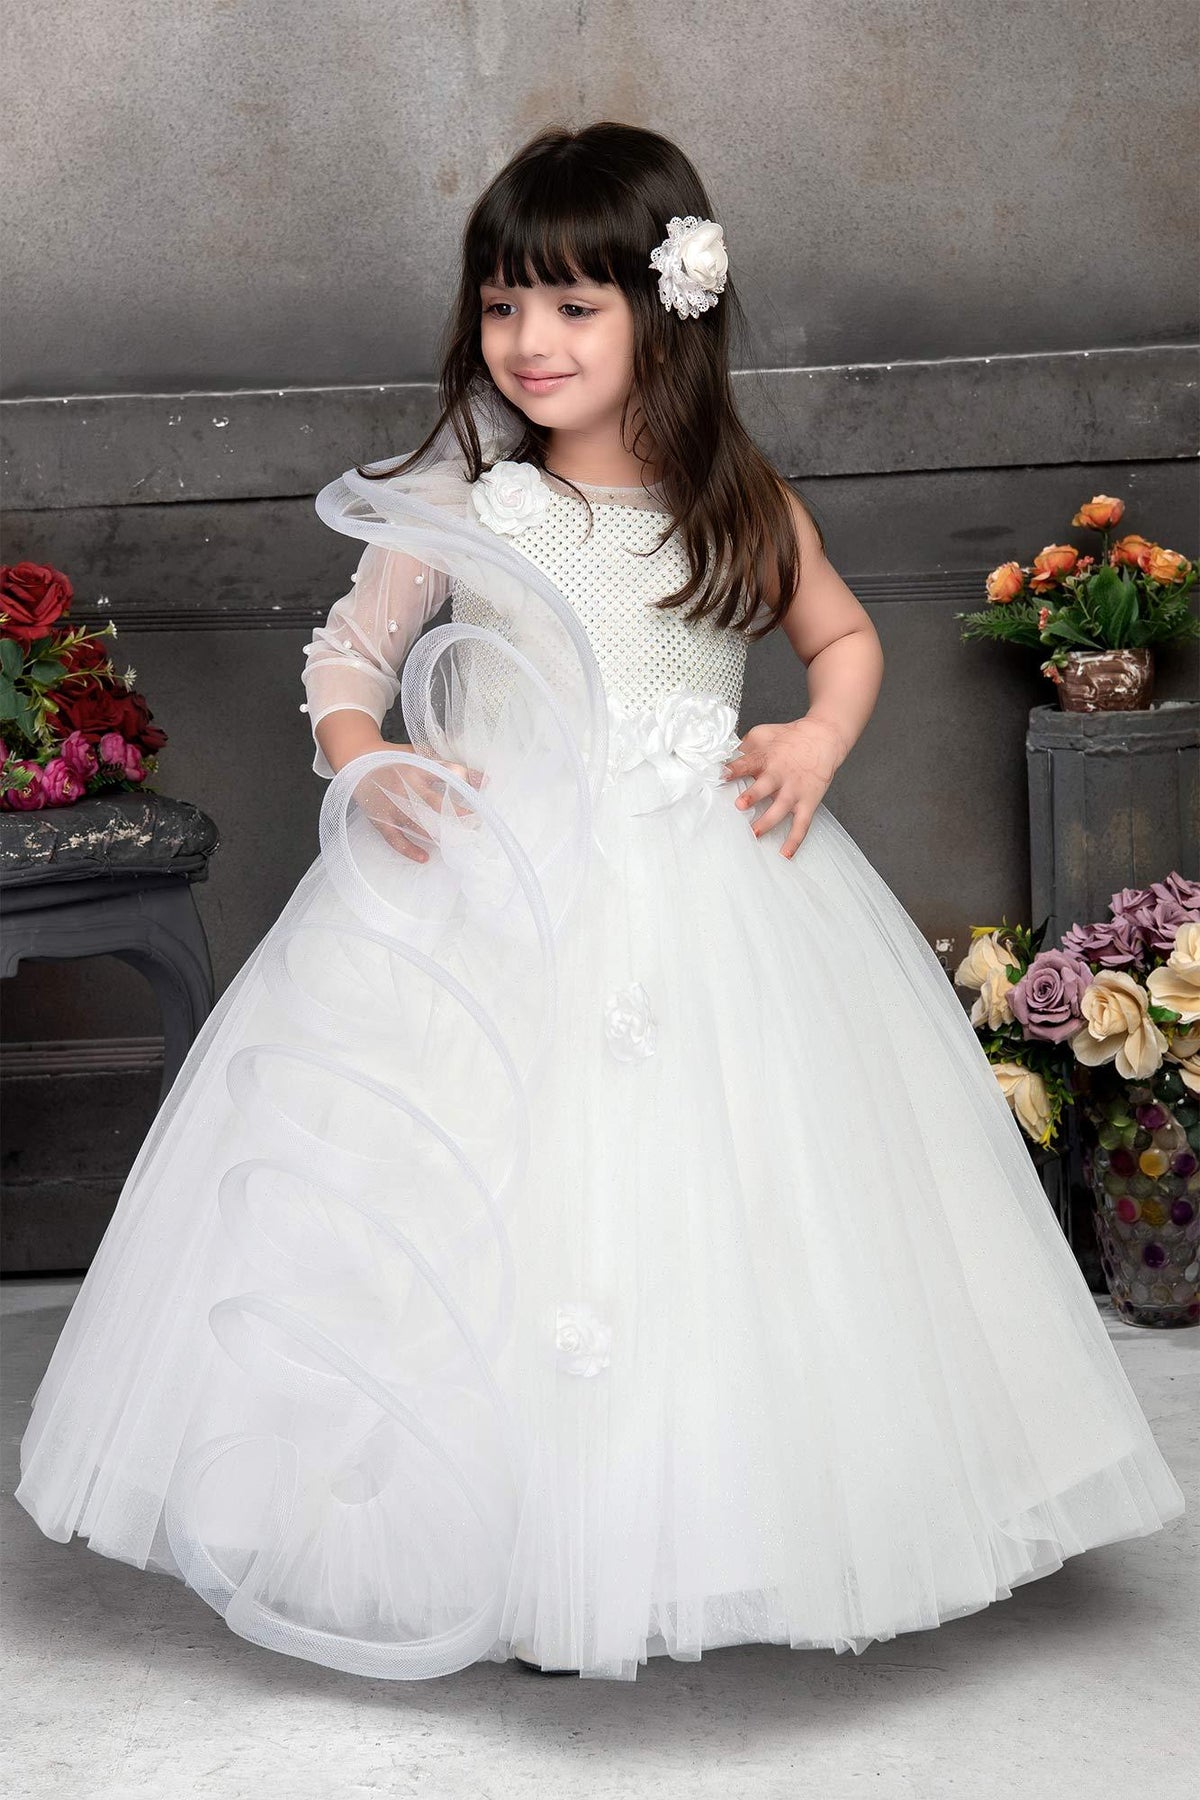 Party Wear Princess Dress For Girl at Rs 450/piece | Princess Costume in  Mumbai | ID: 25163556412